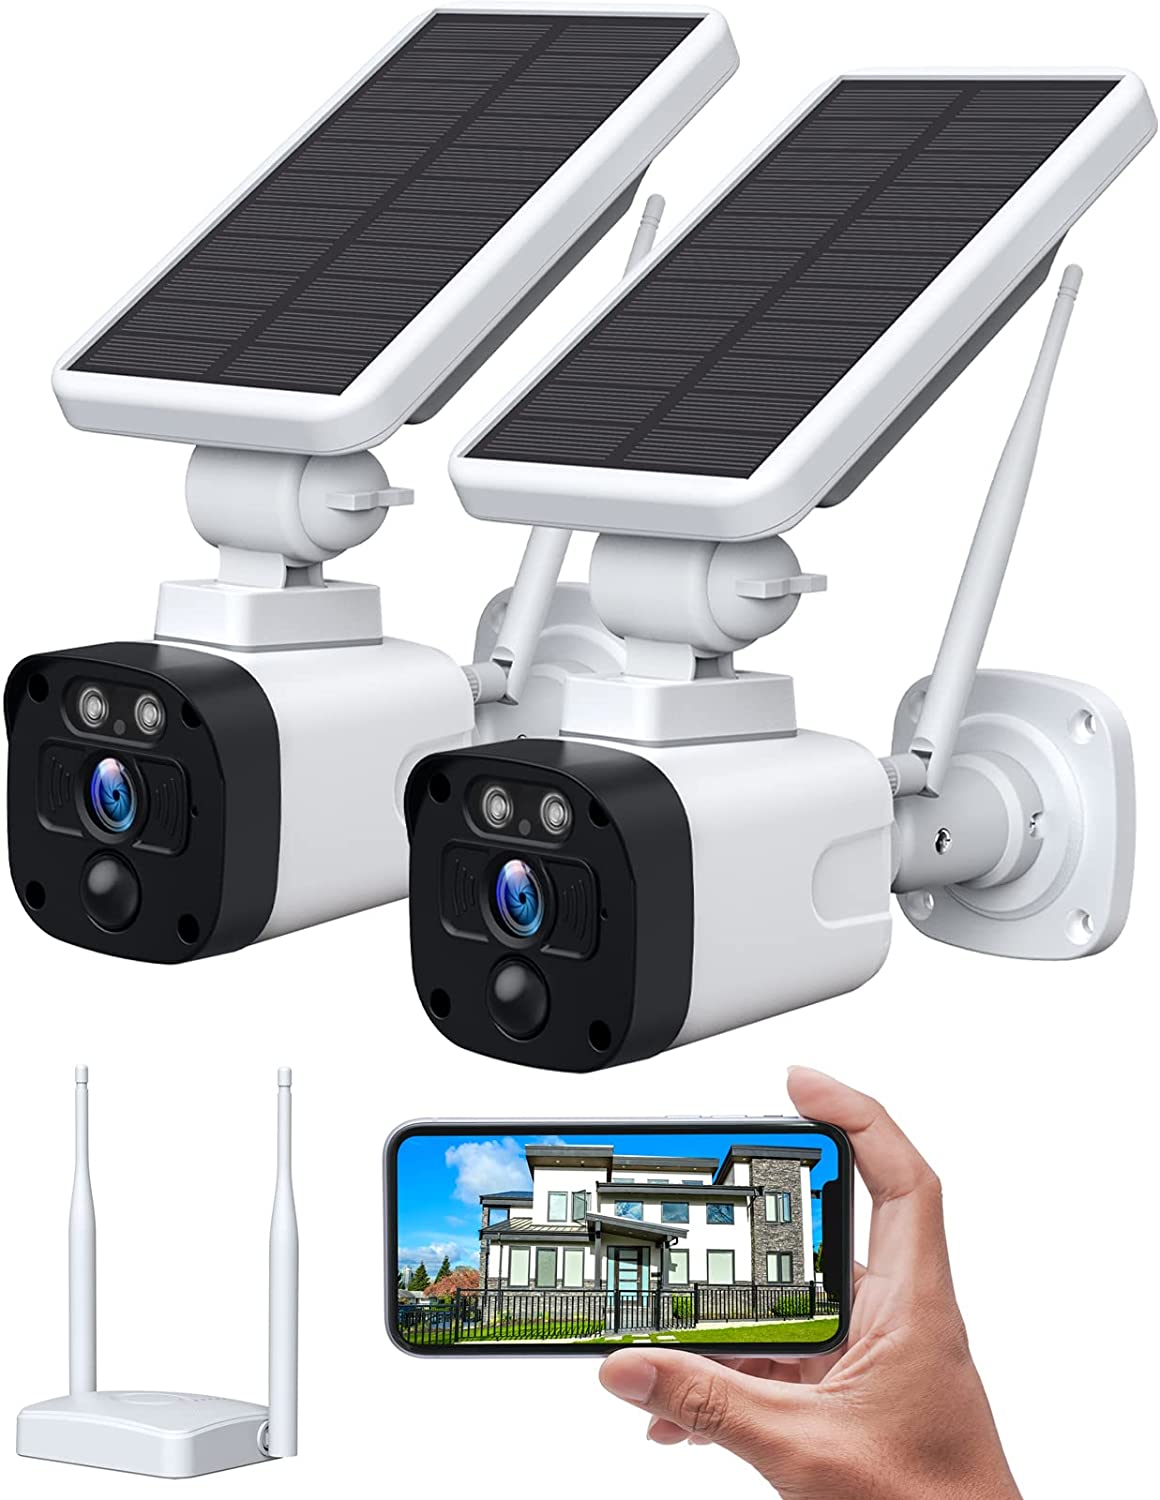 CAMBLINK Wireless Solar Security Camera System for Home Outdoor (2 Cameras with Base Station), 4MP Night Vision, Motion Detection, 2-Way Audio, APP Remote, IP65 Waterproof, SD/Cloud Storage